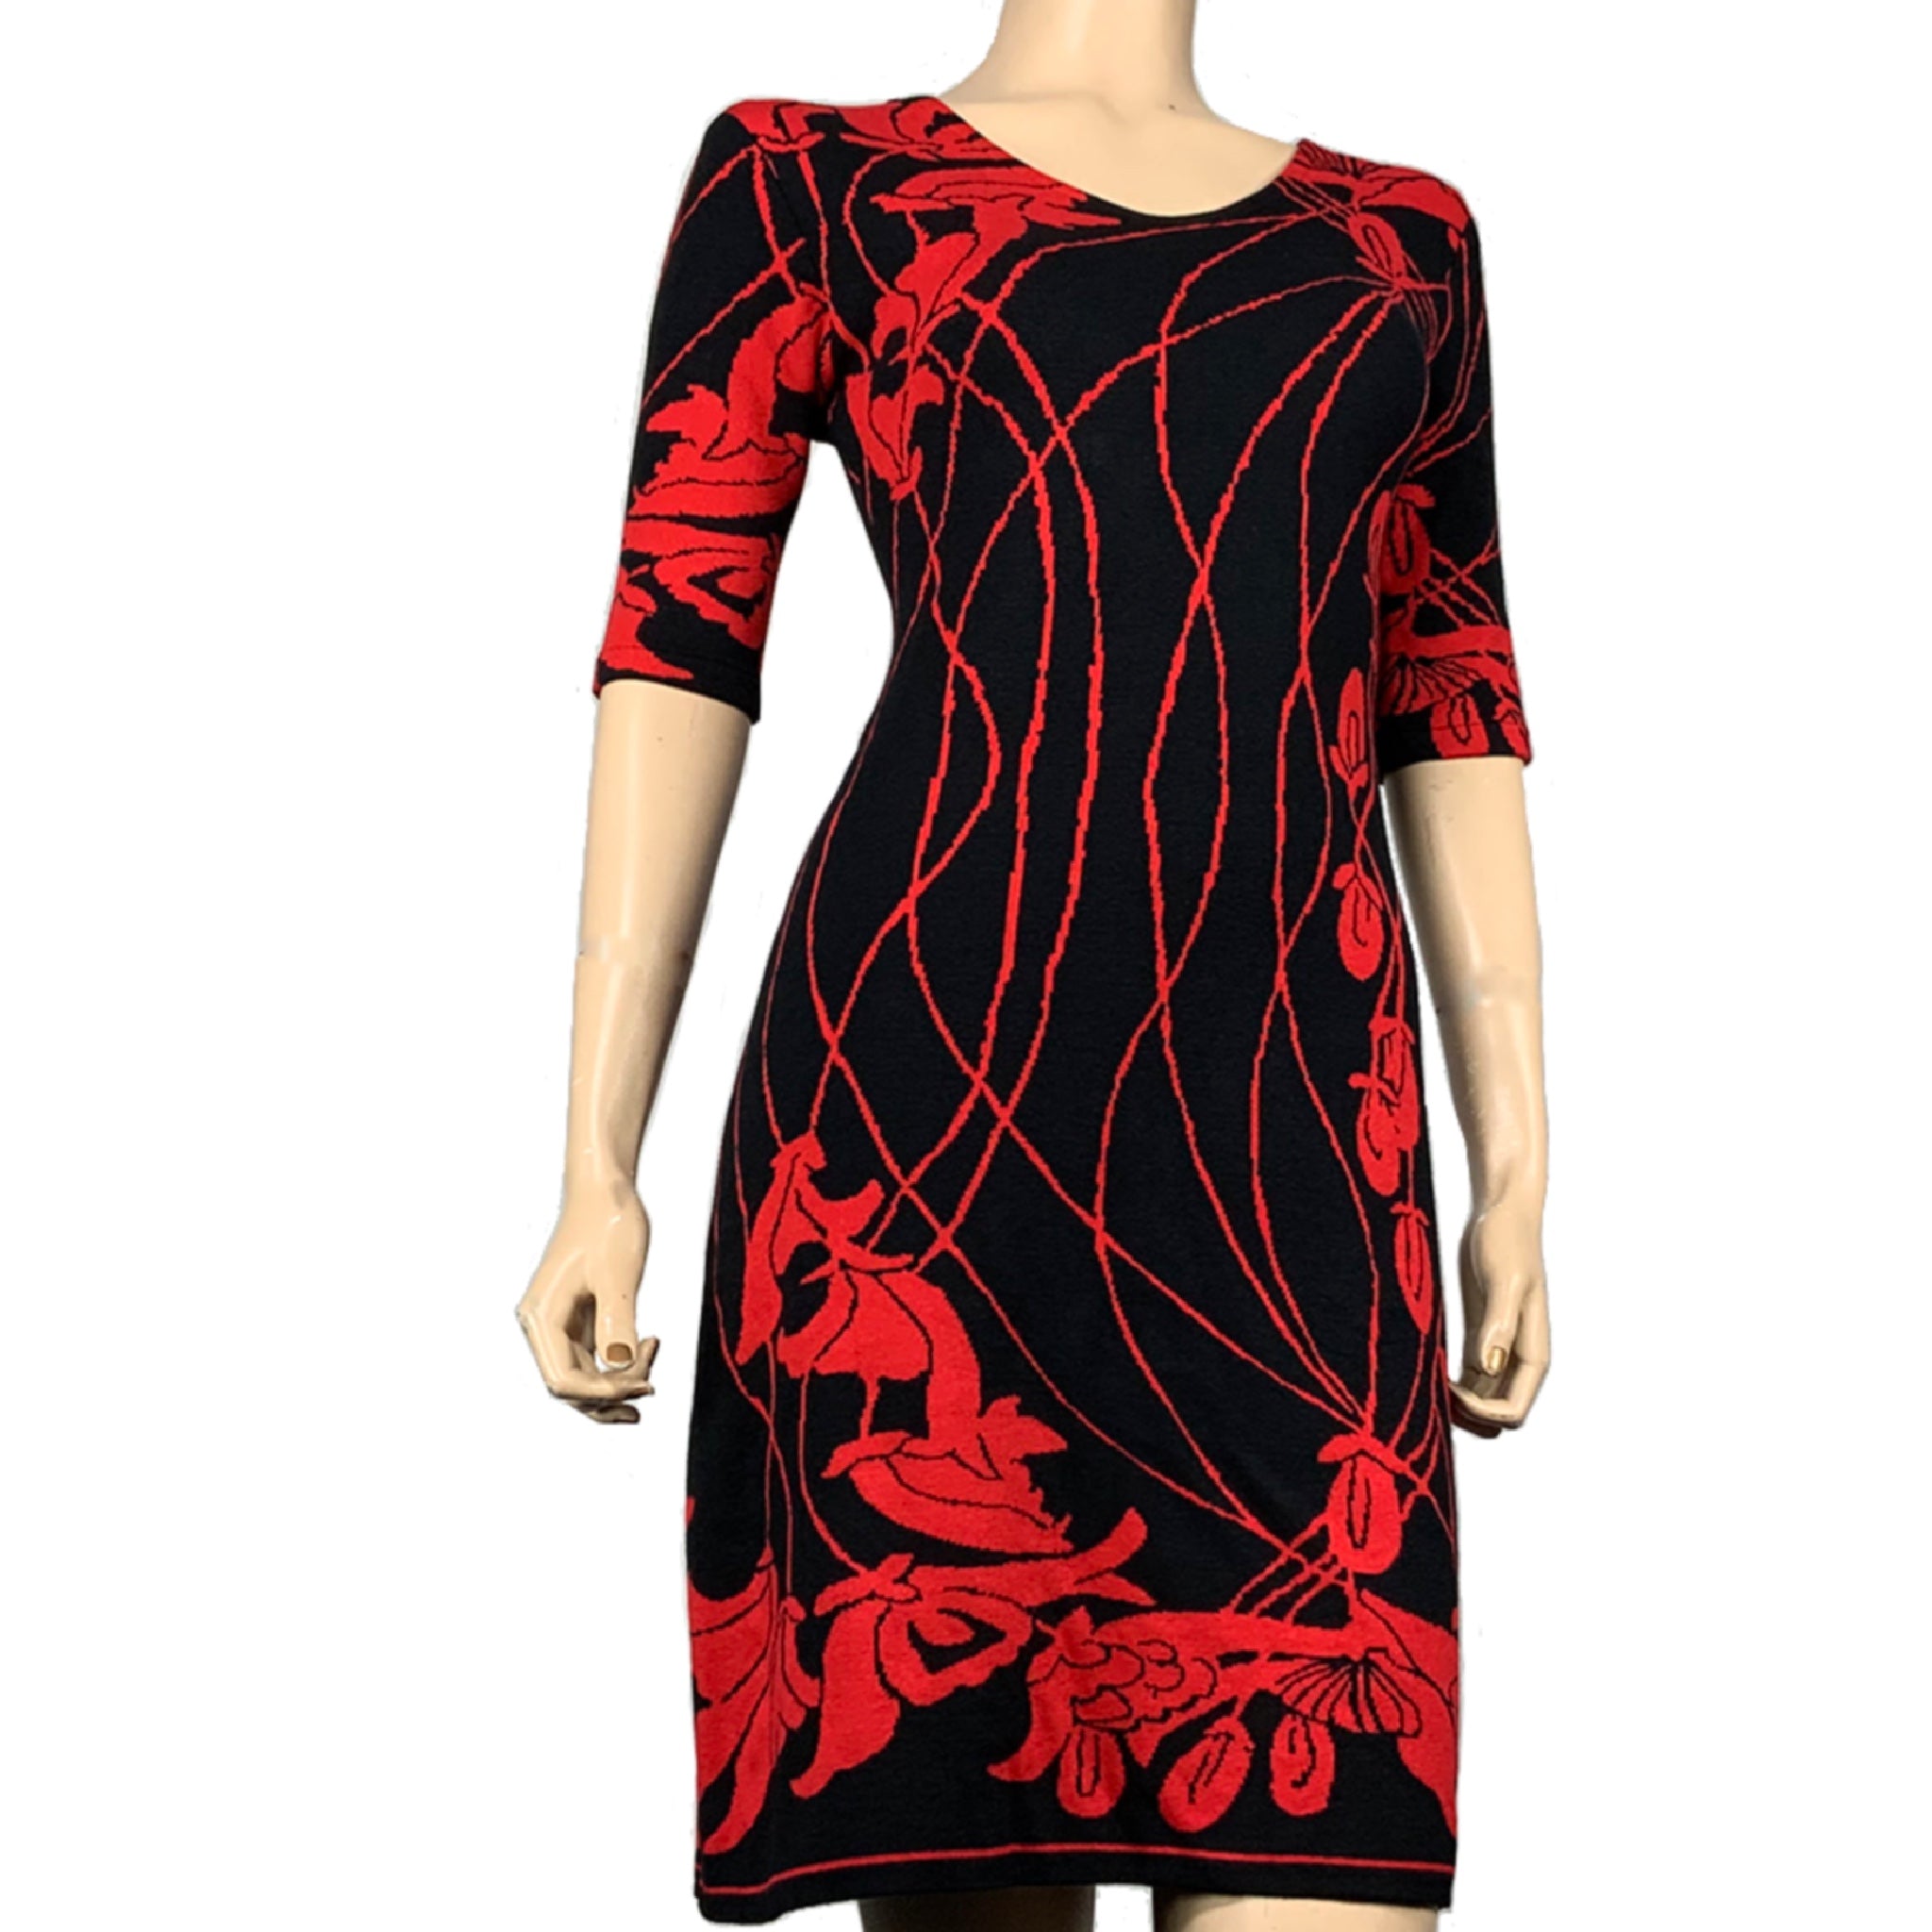 Water Lily Amanda Dress Black and Red